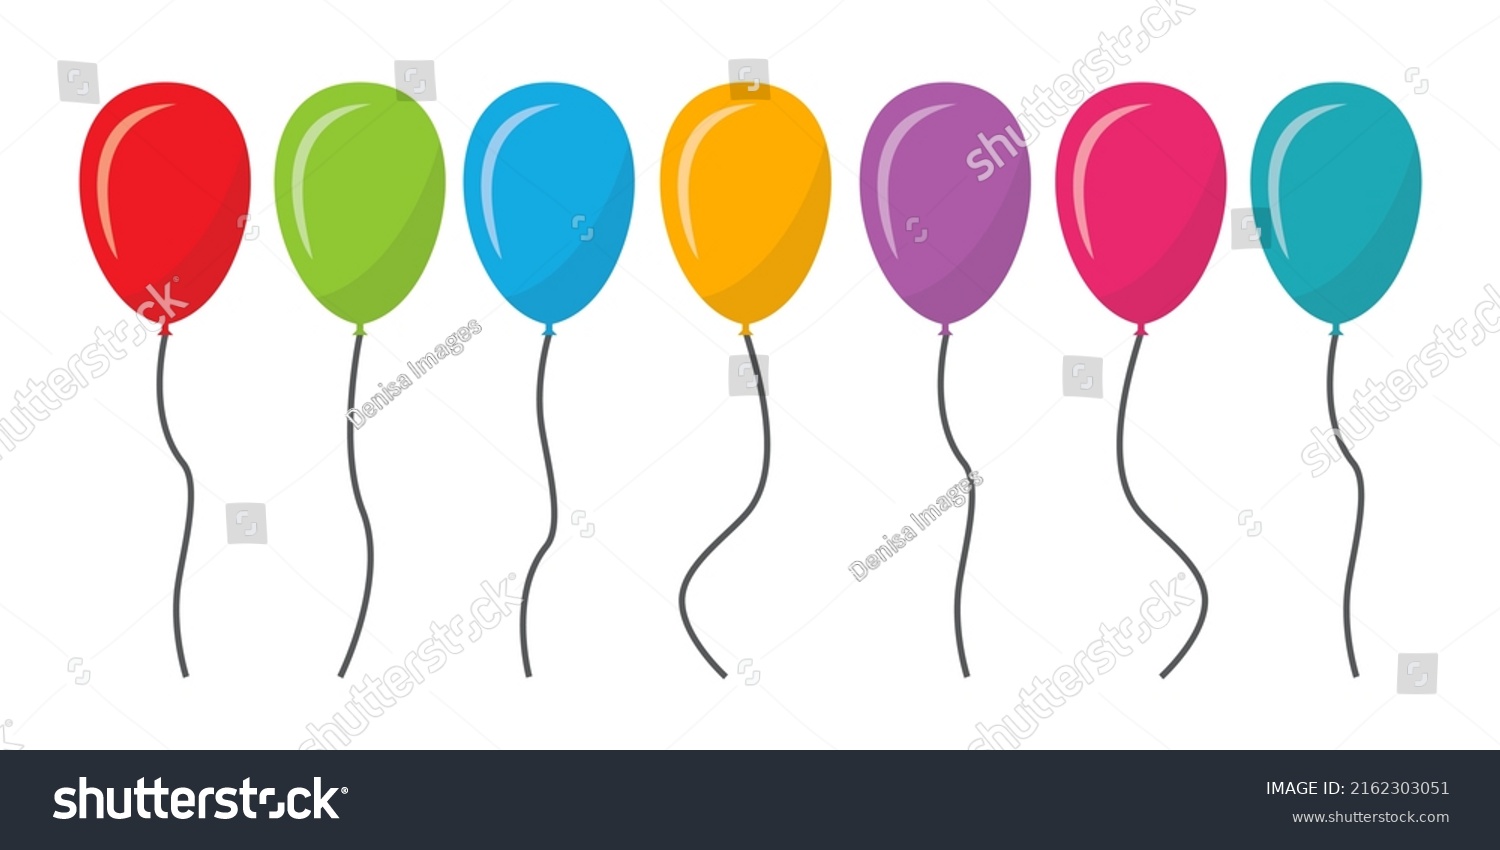 Balloon in cartoon style. Bunch of balloons for birthday and party. Flying ballon with rope. Blue, red, yellow and green ball isolated on white background. Flat icon for celebrate and carnival. Vector #2162303051